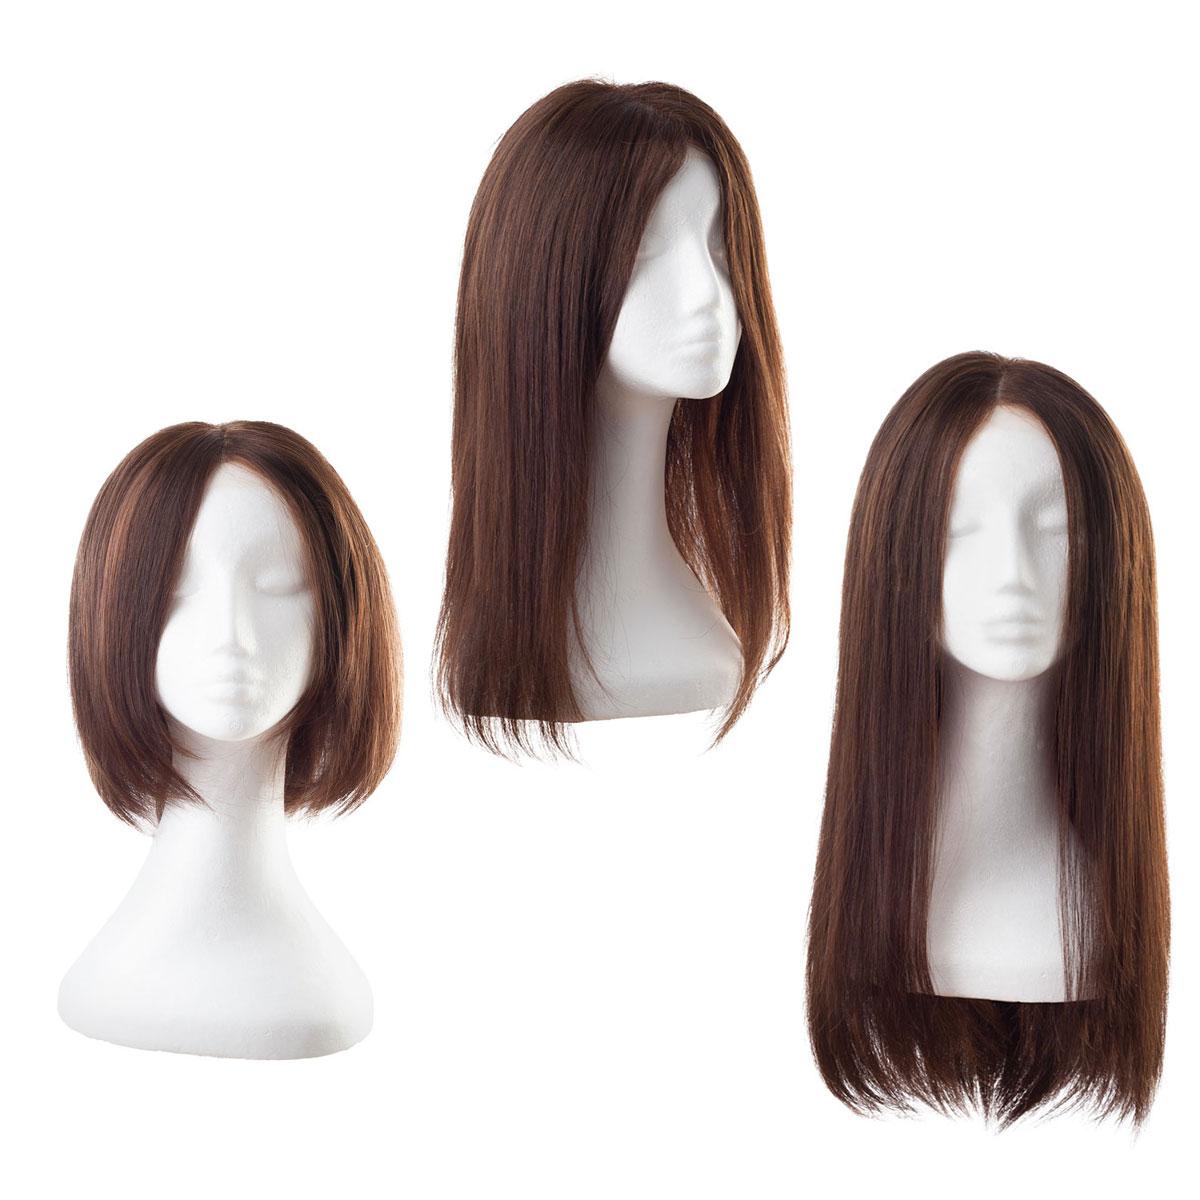 Manufacturers,Exporters,Suppliers of Lace Wigs